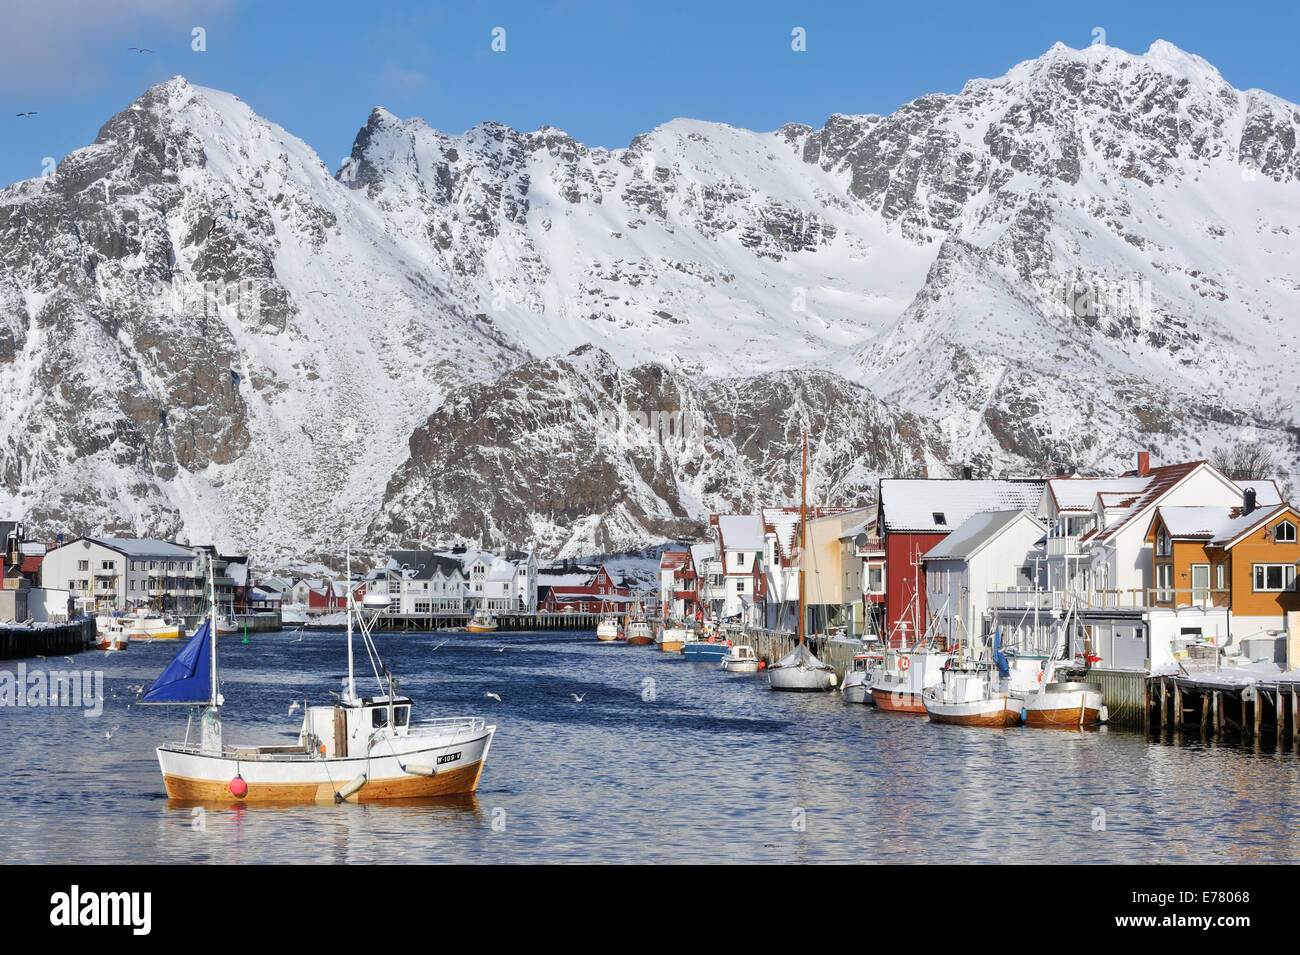 Marina and town in front of snowy mountain range. Henningsvær, Lofoten, Norway Stock Photo